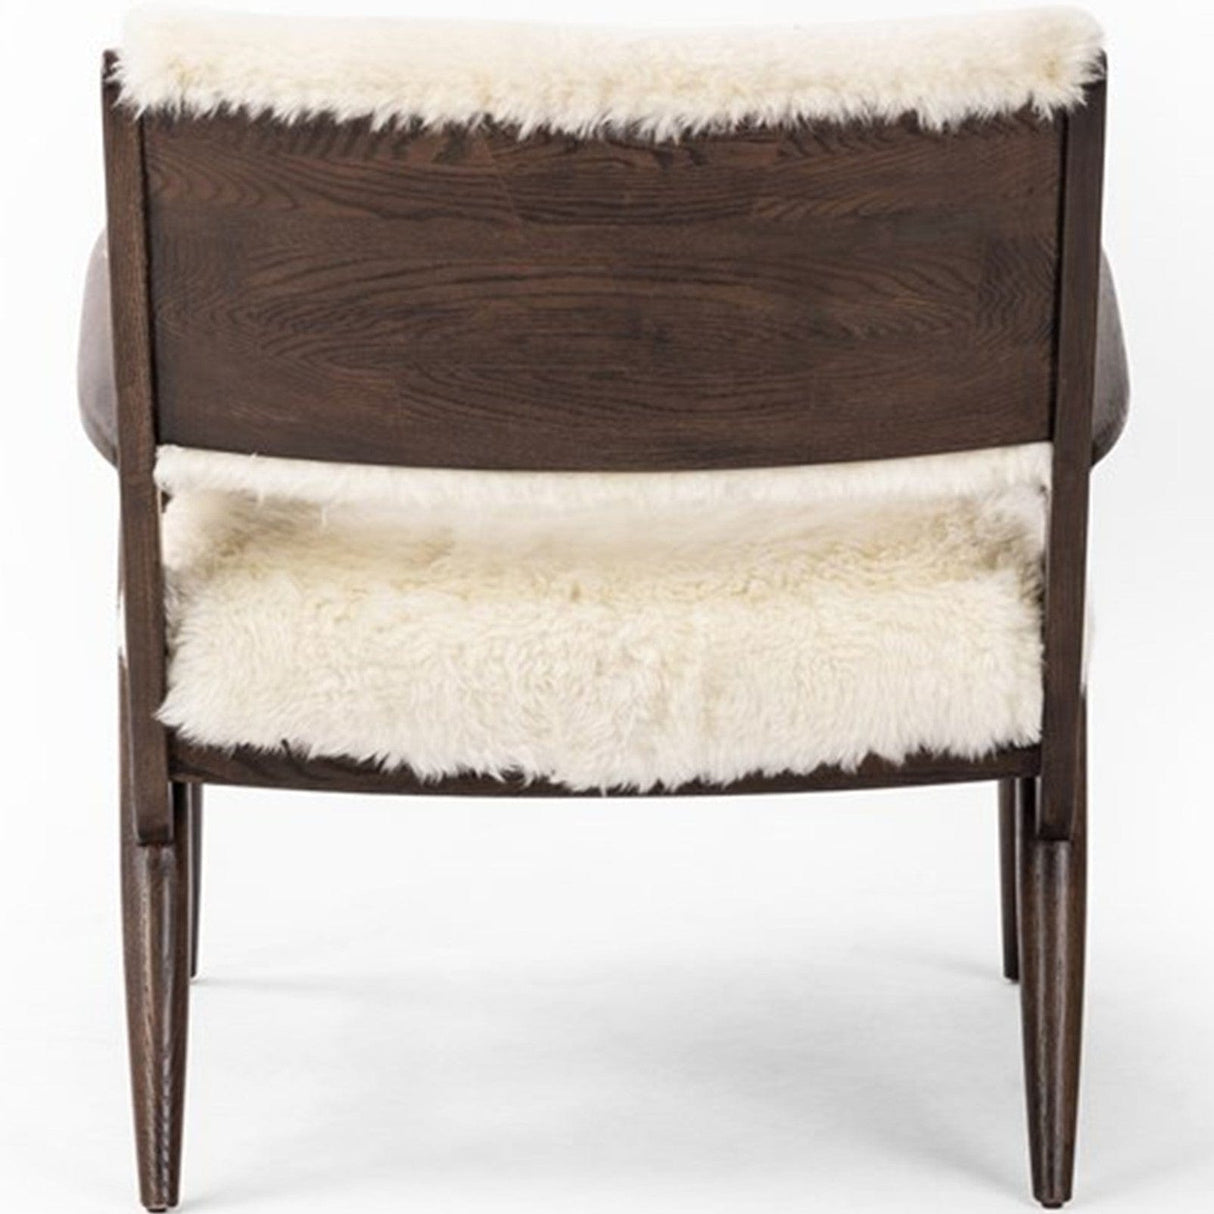 Four Hands Papile Chair Upholstered Chair